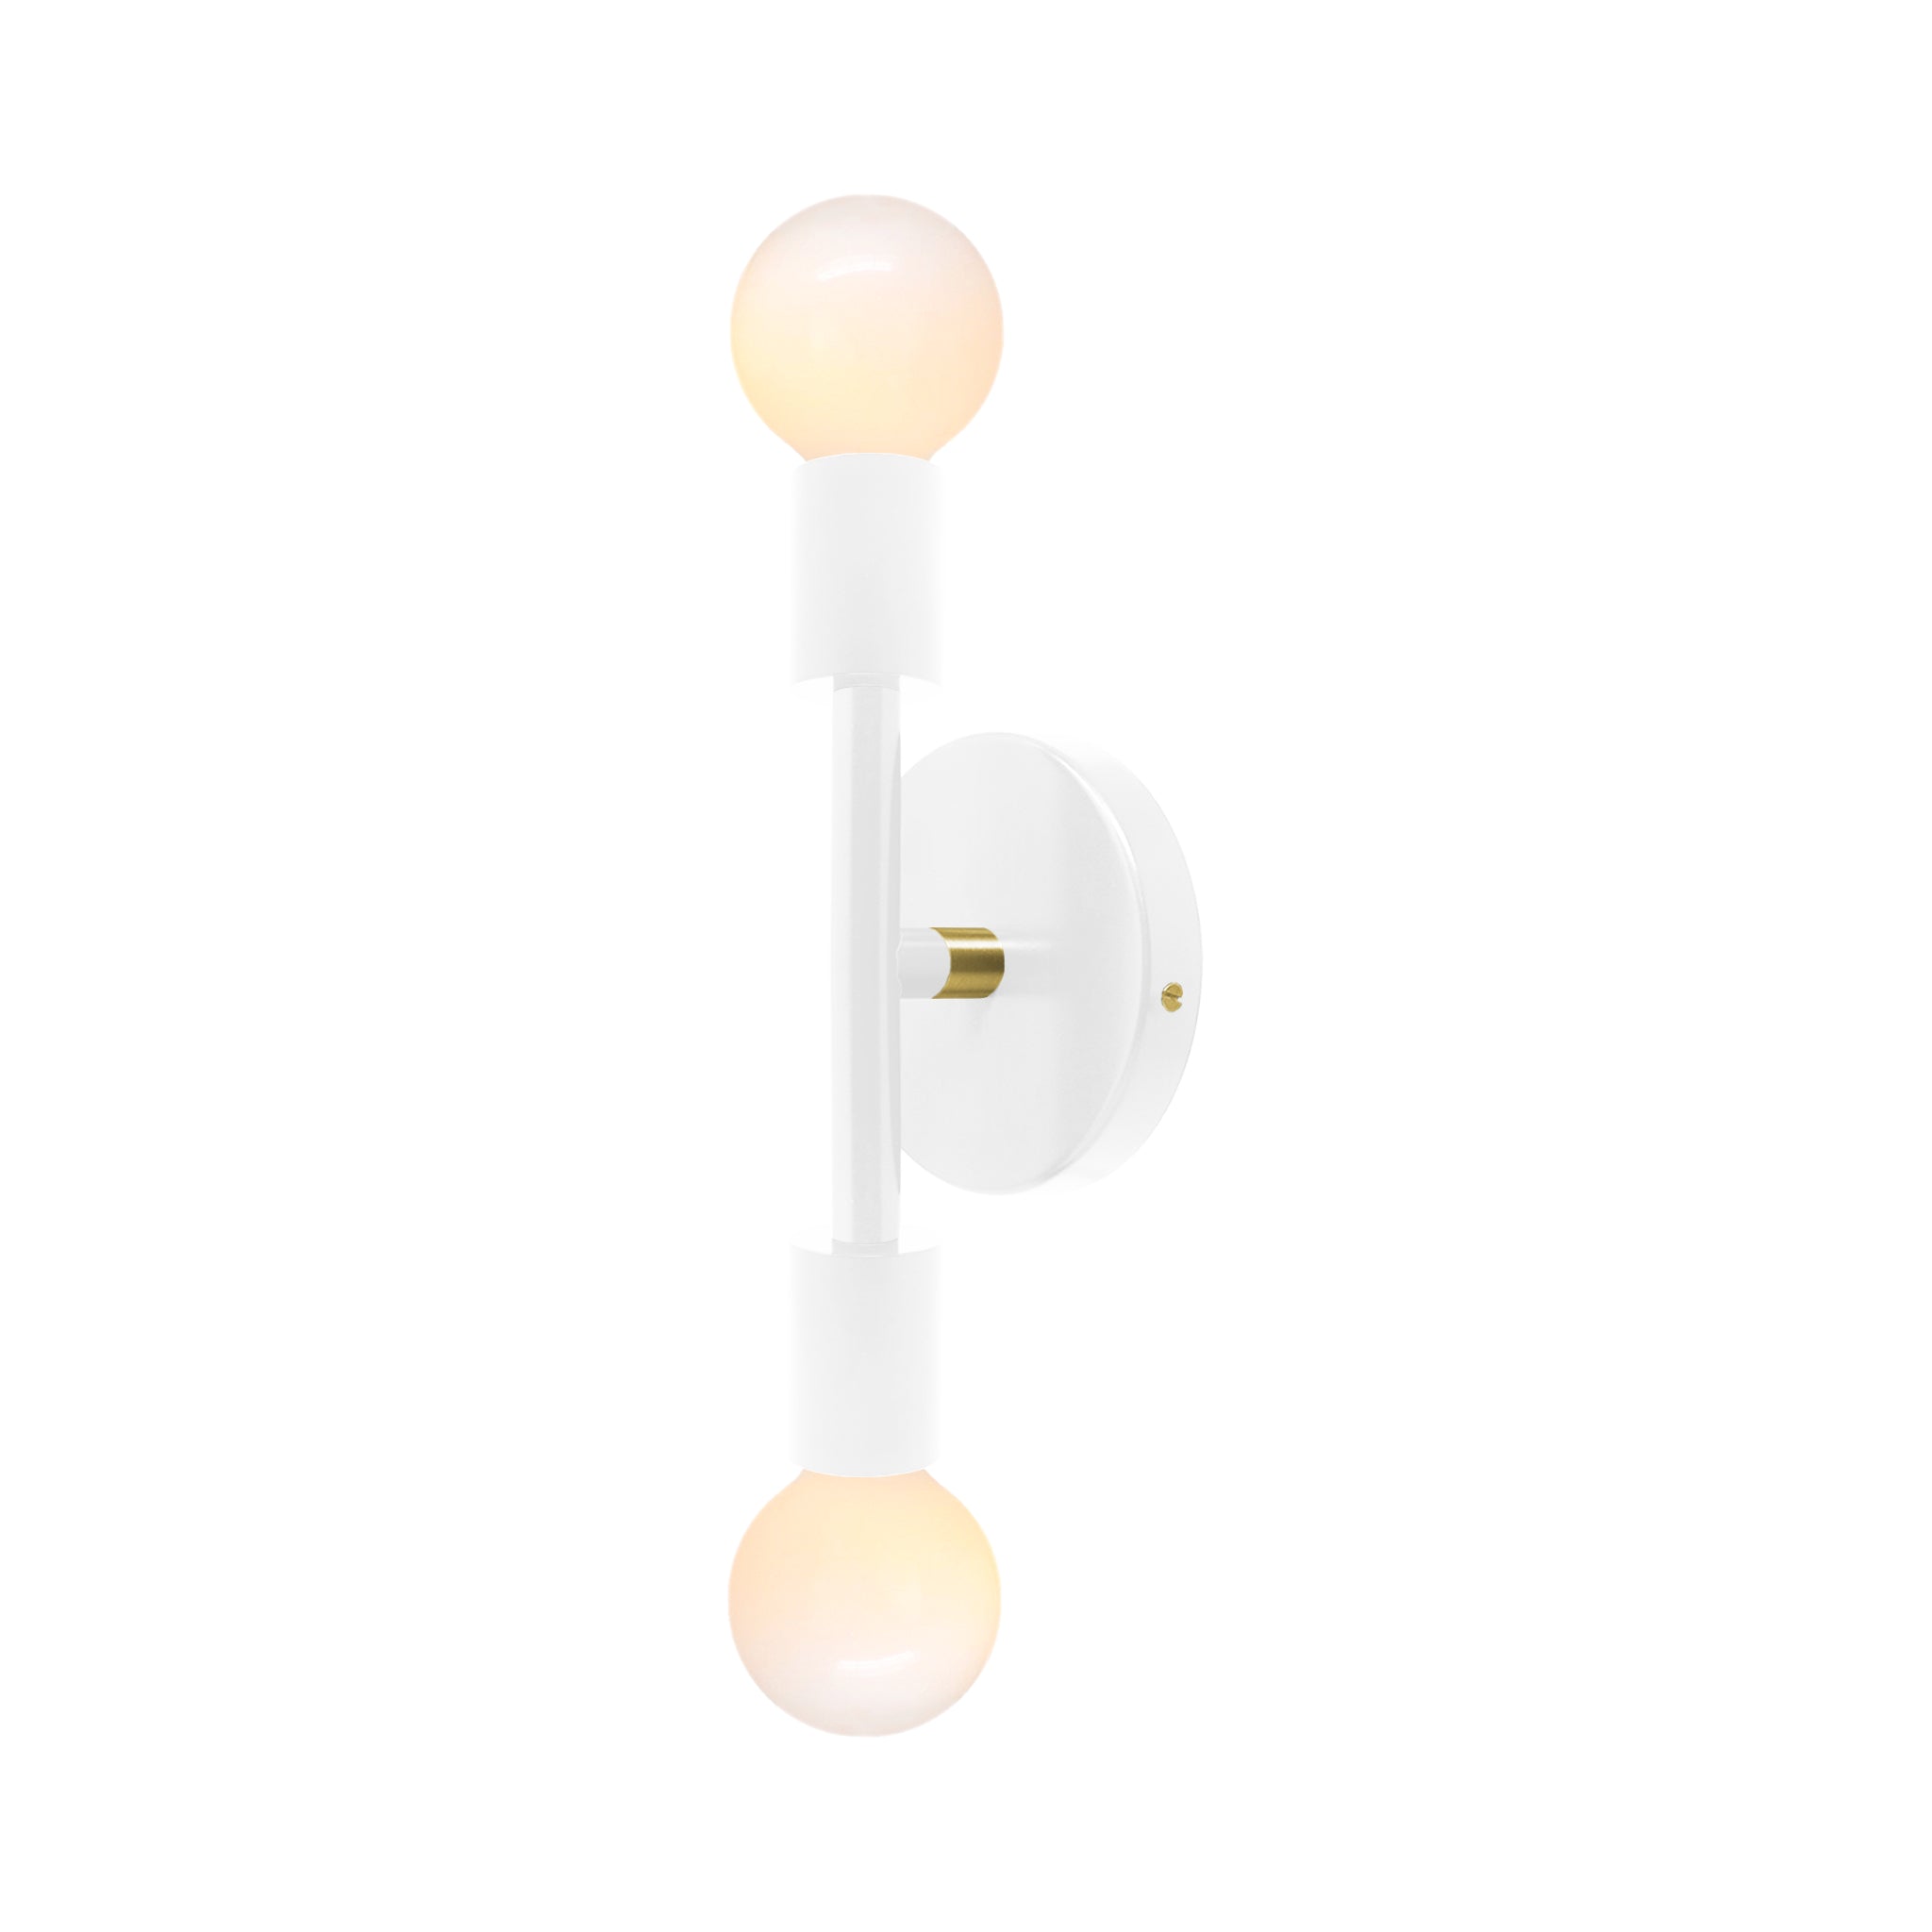 Brass and white color Pilot sconce 11" Dutton Brown lighting